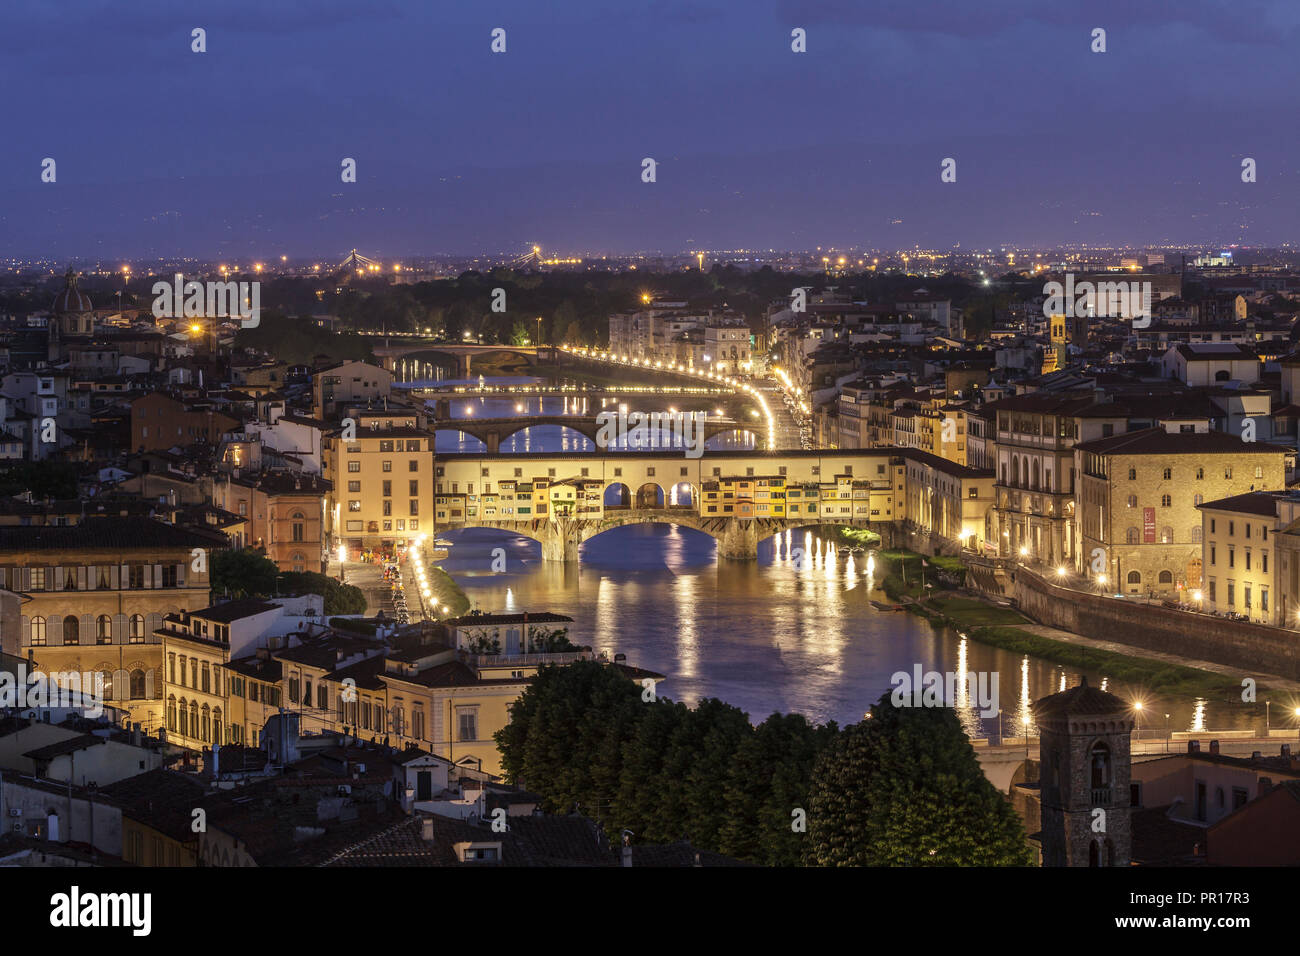 The River Arno and Ponte Vecchio at dusk, UNESCO World Heritage Site, Florence, Tuscany, Italy, Europe Stock Photo